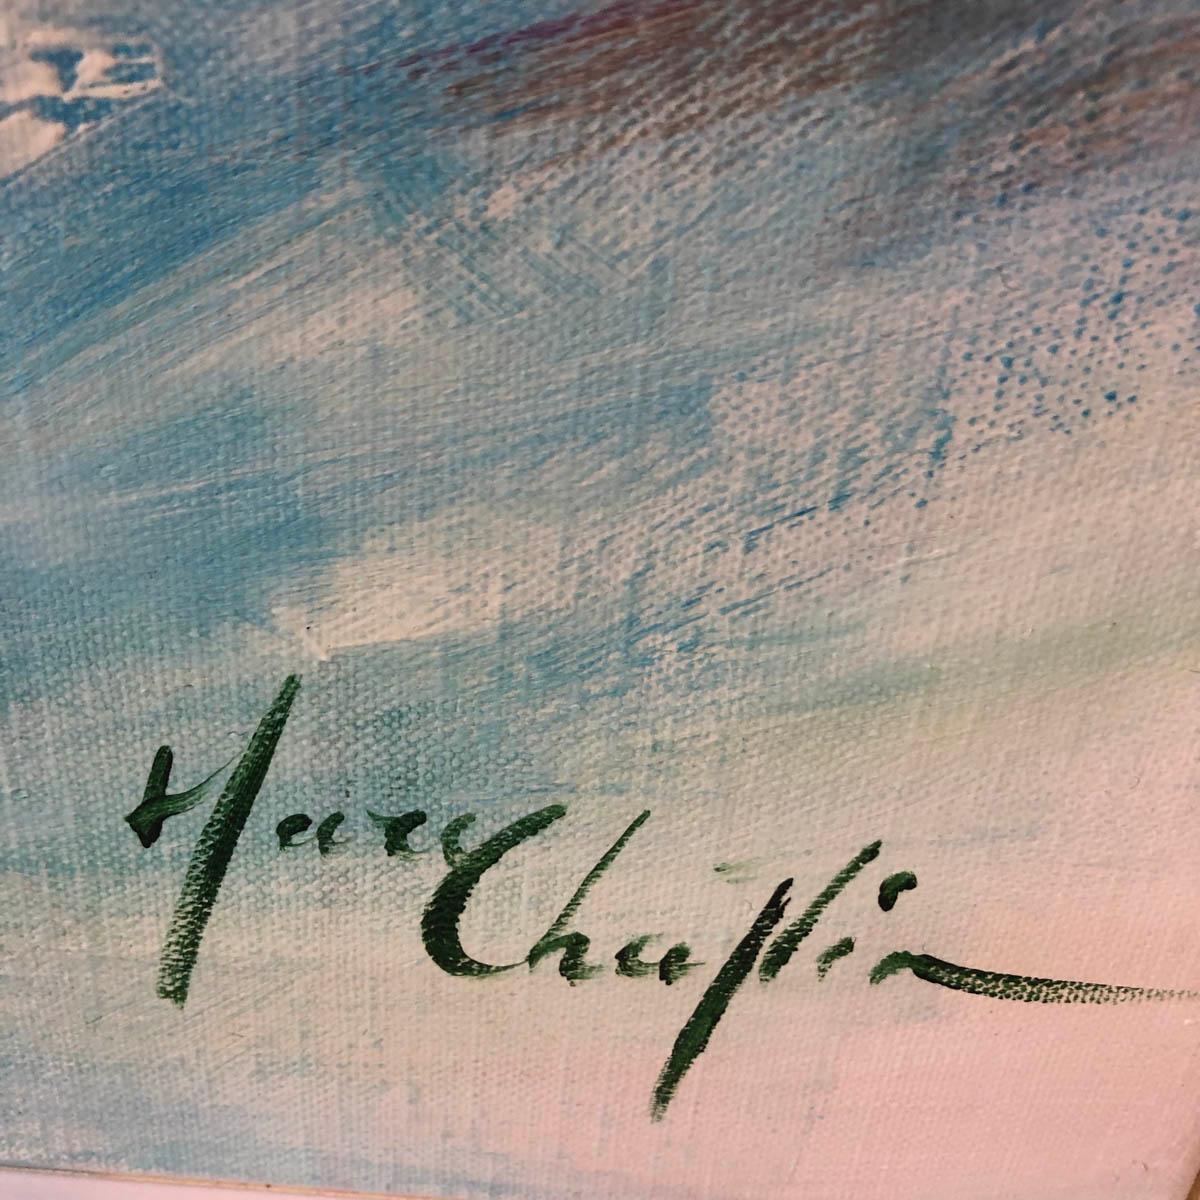 Mary Chaplin. Bouquet of joy. More than just a figurative representation of a bouquet, Mary Chaplin likes to paint flowers in a style that lies between impressionism and abstraction. Playing with colors and shapes that takes the viewer into her